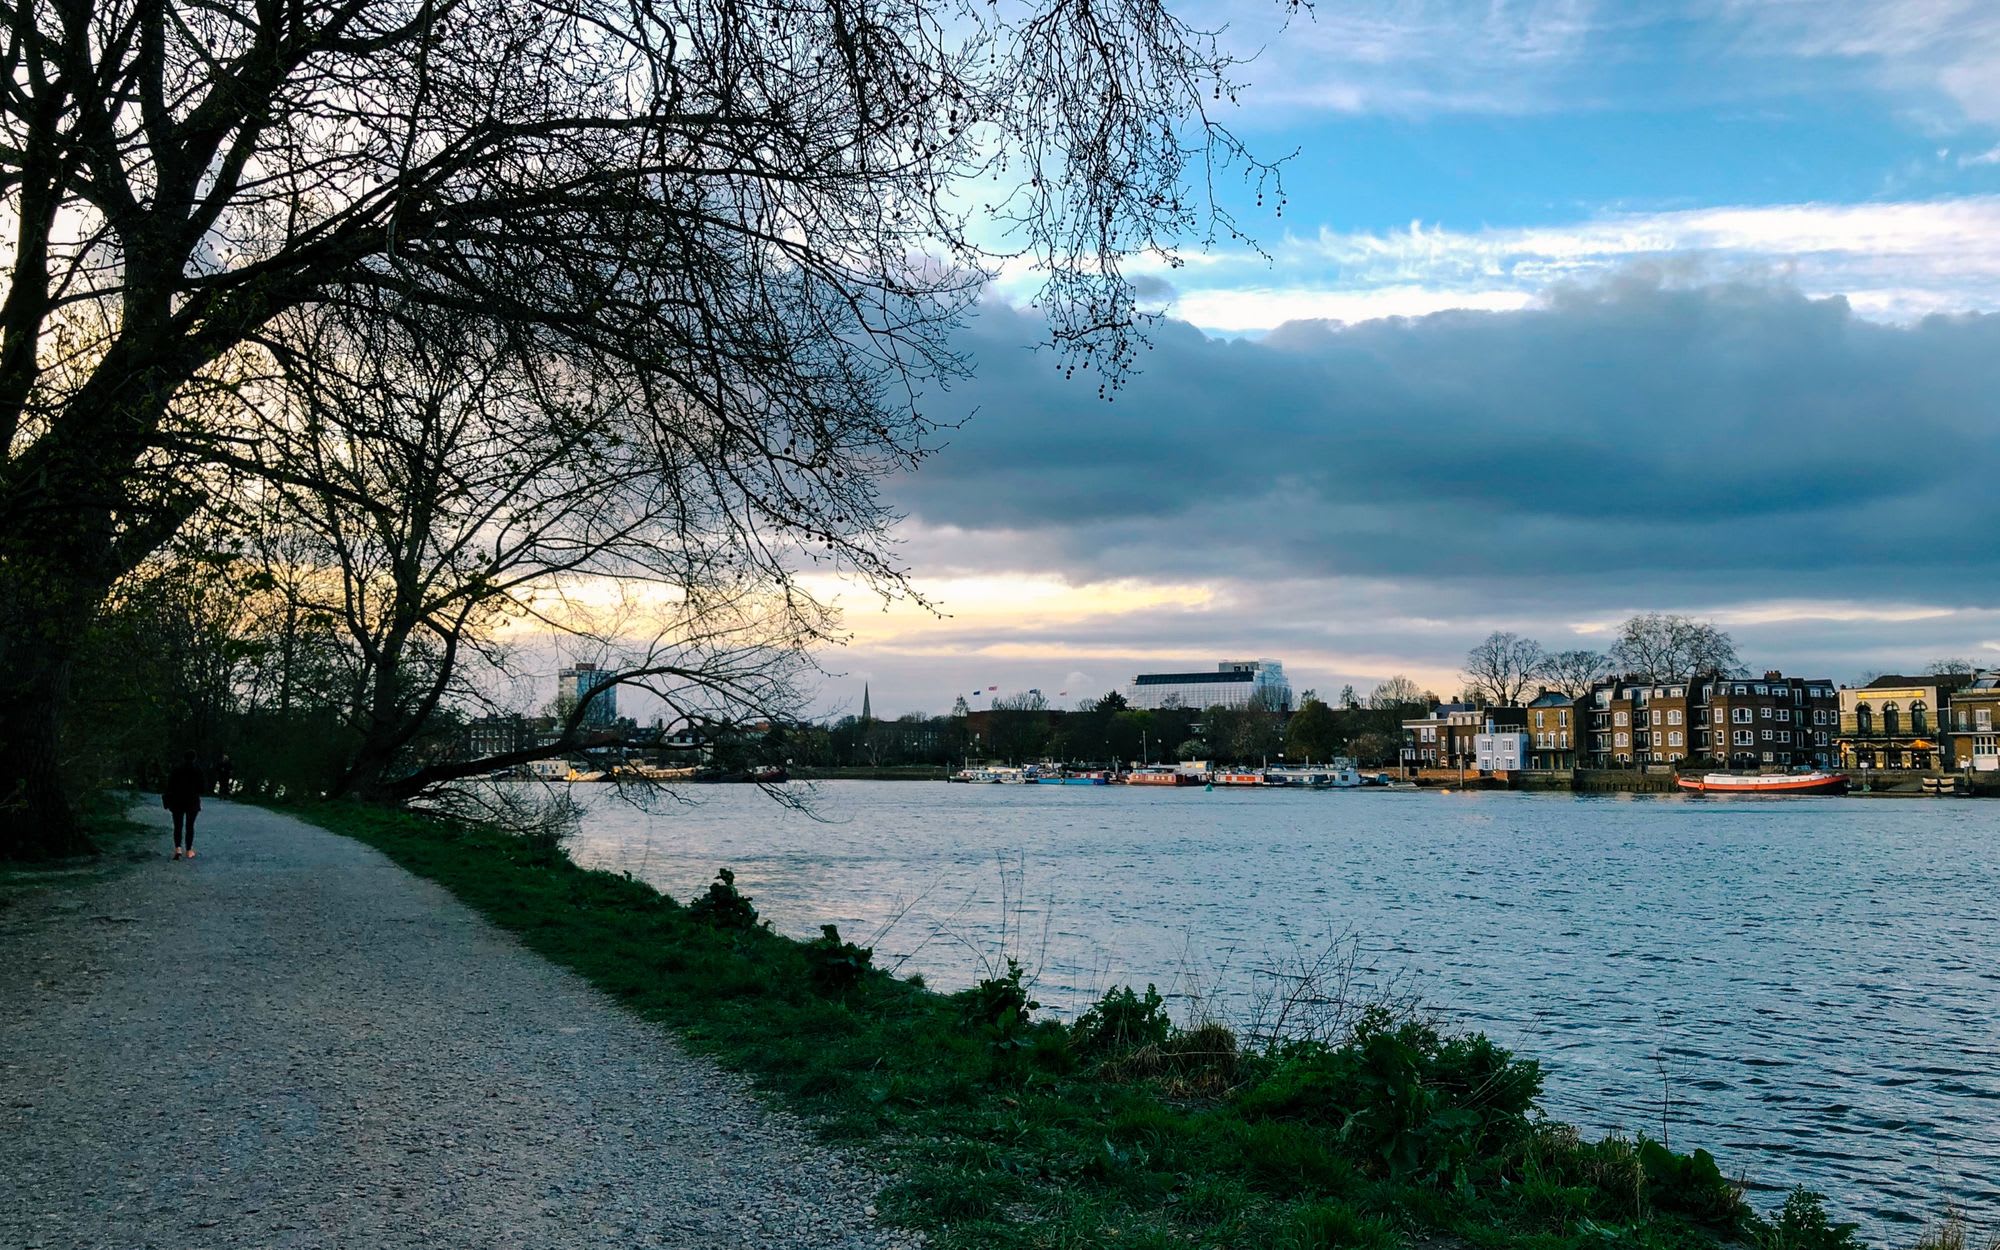 View along the River Thames looking from Barnes near Hammersmith Bridge